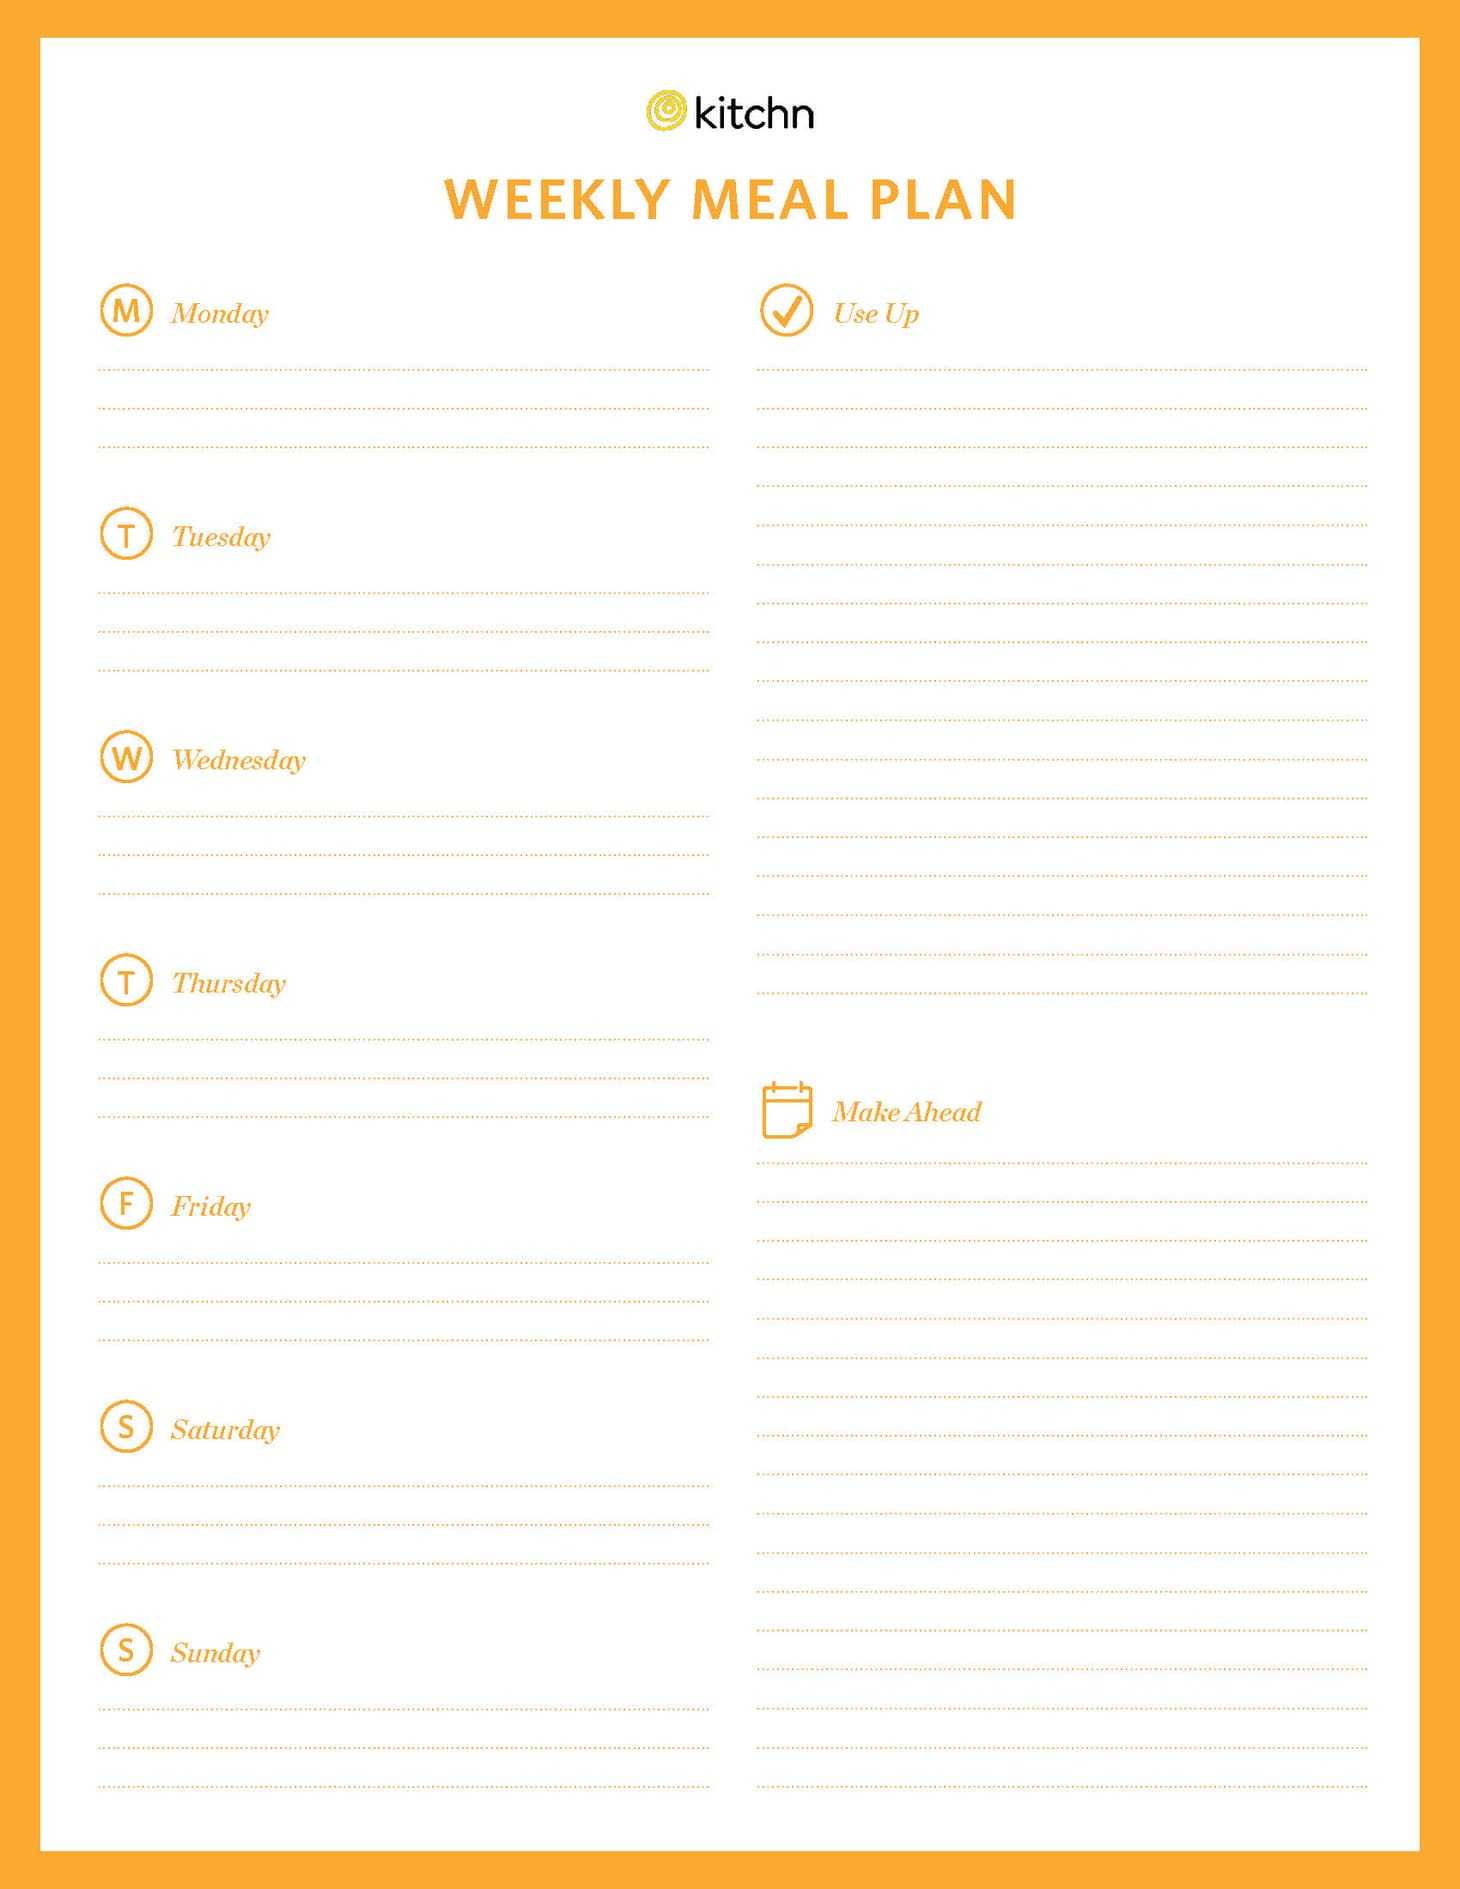 Kitchn's Meal Plan Template | Kitchn Intended For Blank Meal Plan Template